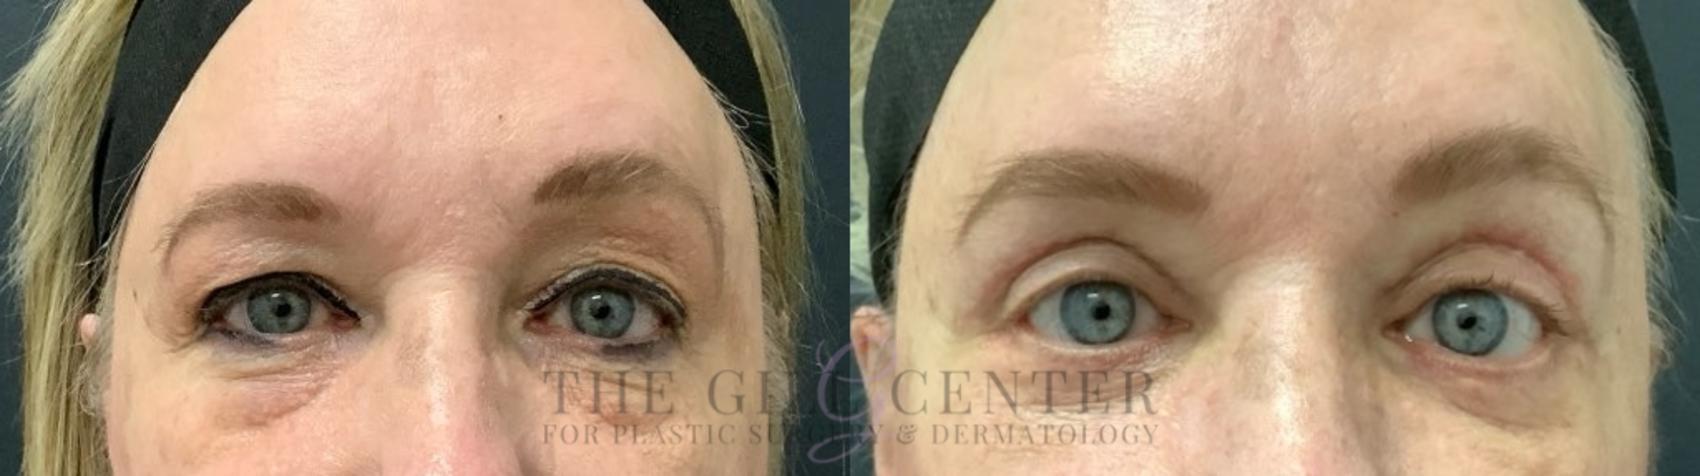 Eyelid Lift Case 625 Before & After Front | The Woodlands, TX | The Gill Center for Plastic Surgery and Dermatology